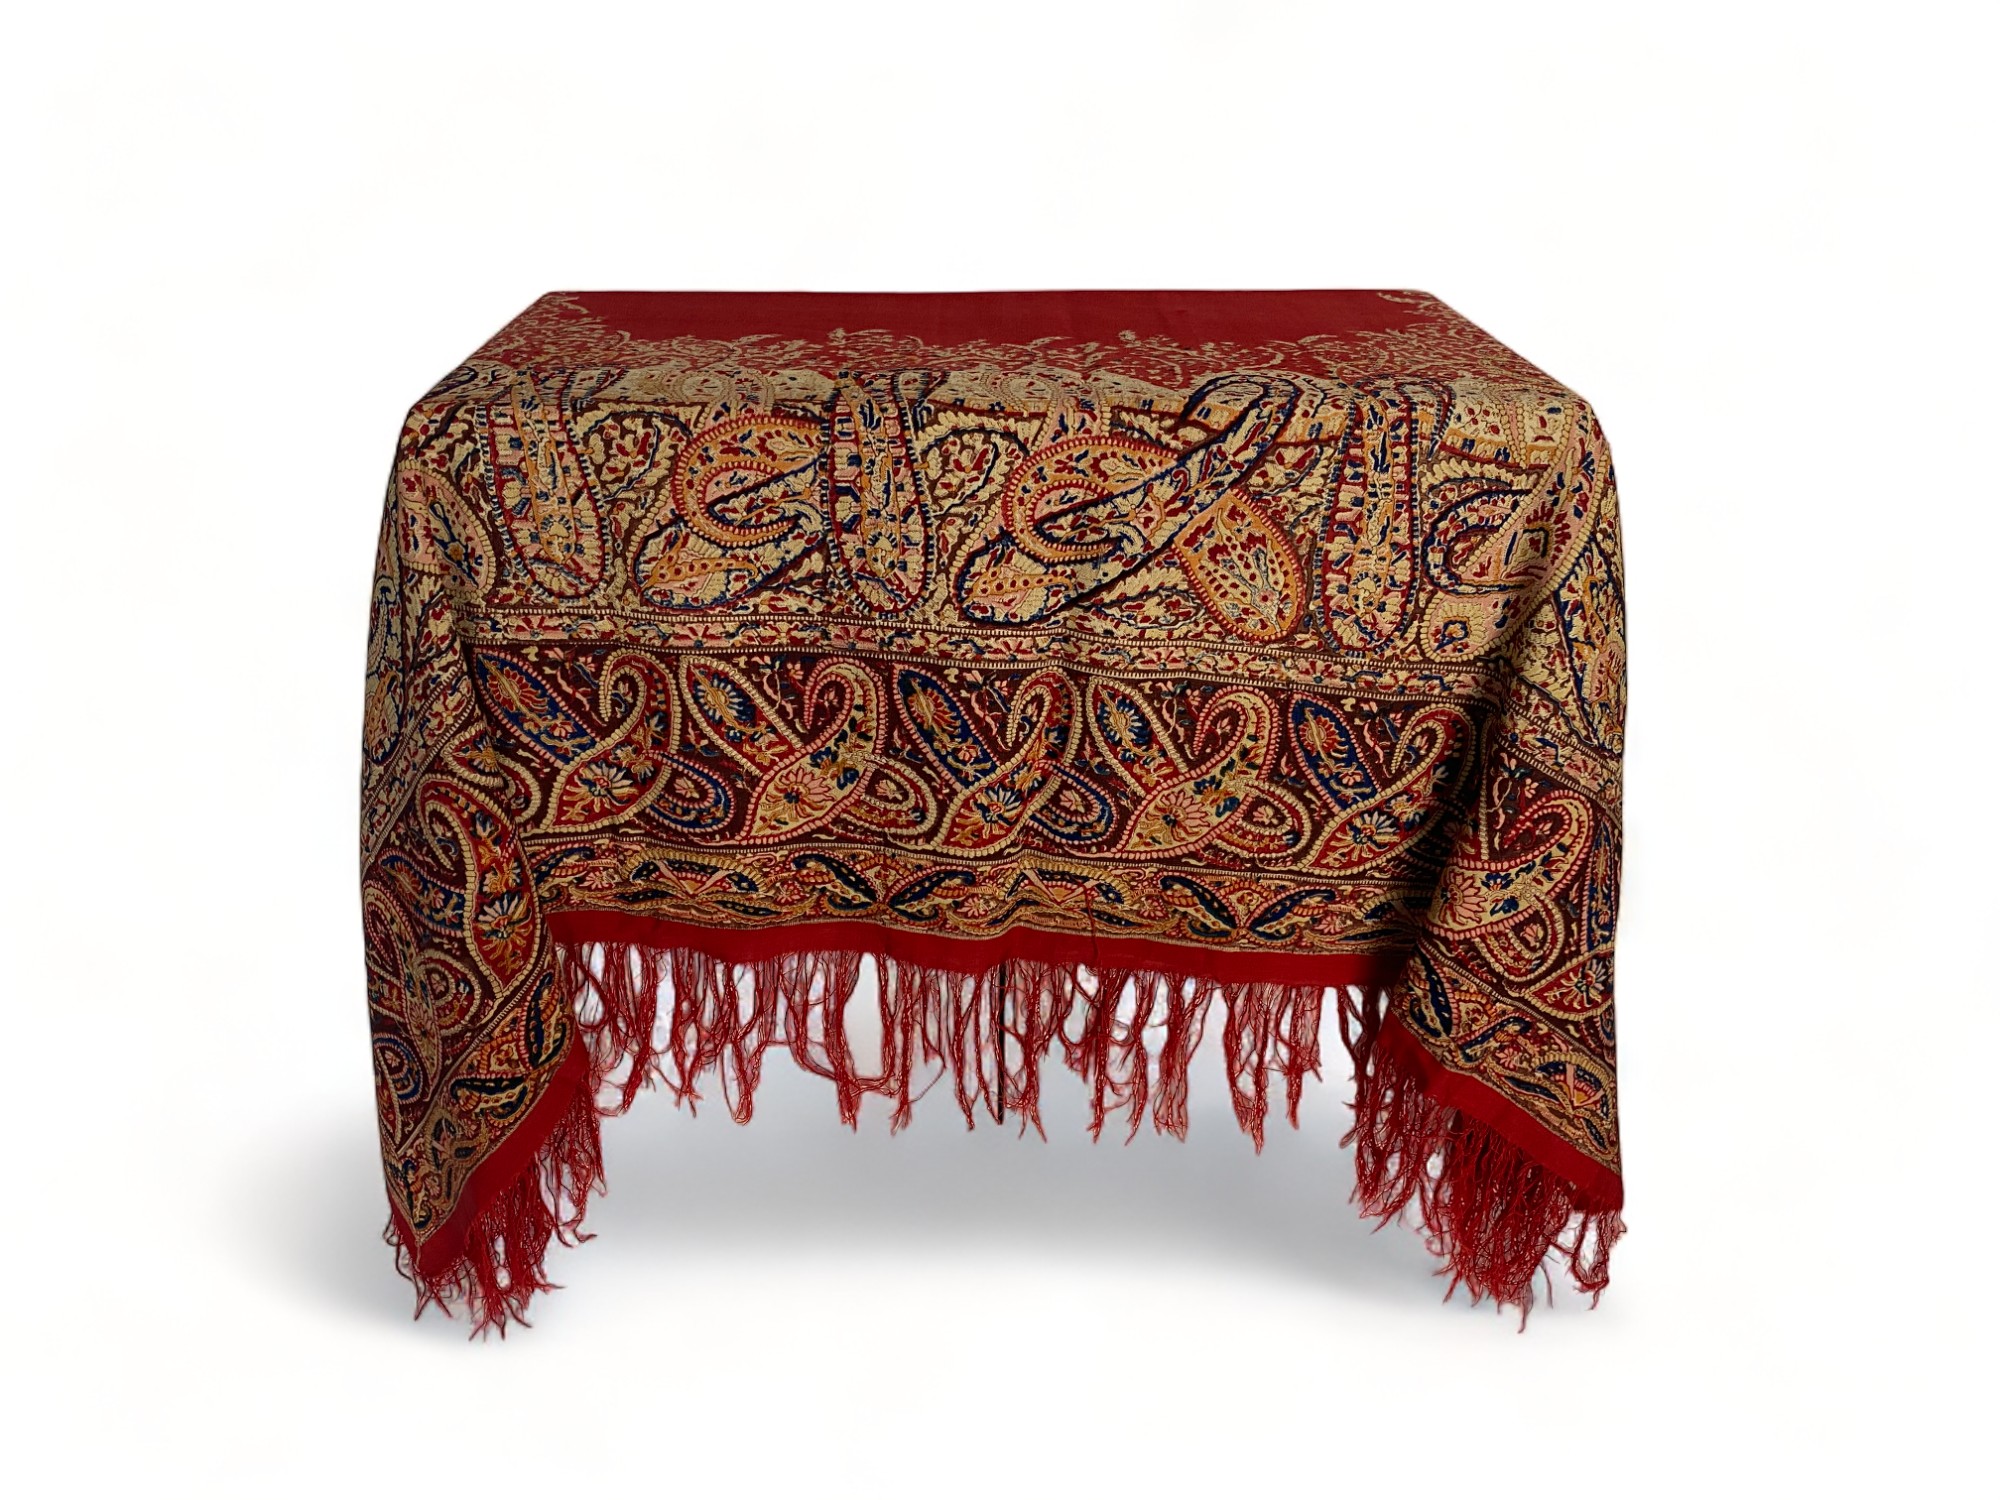 A 19th century red, brown and blue paisley cotton shawl together with another shawl